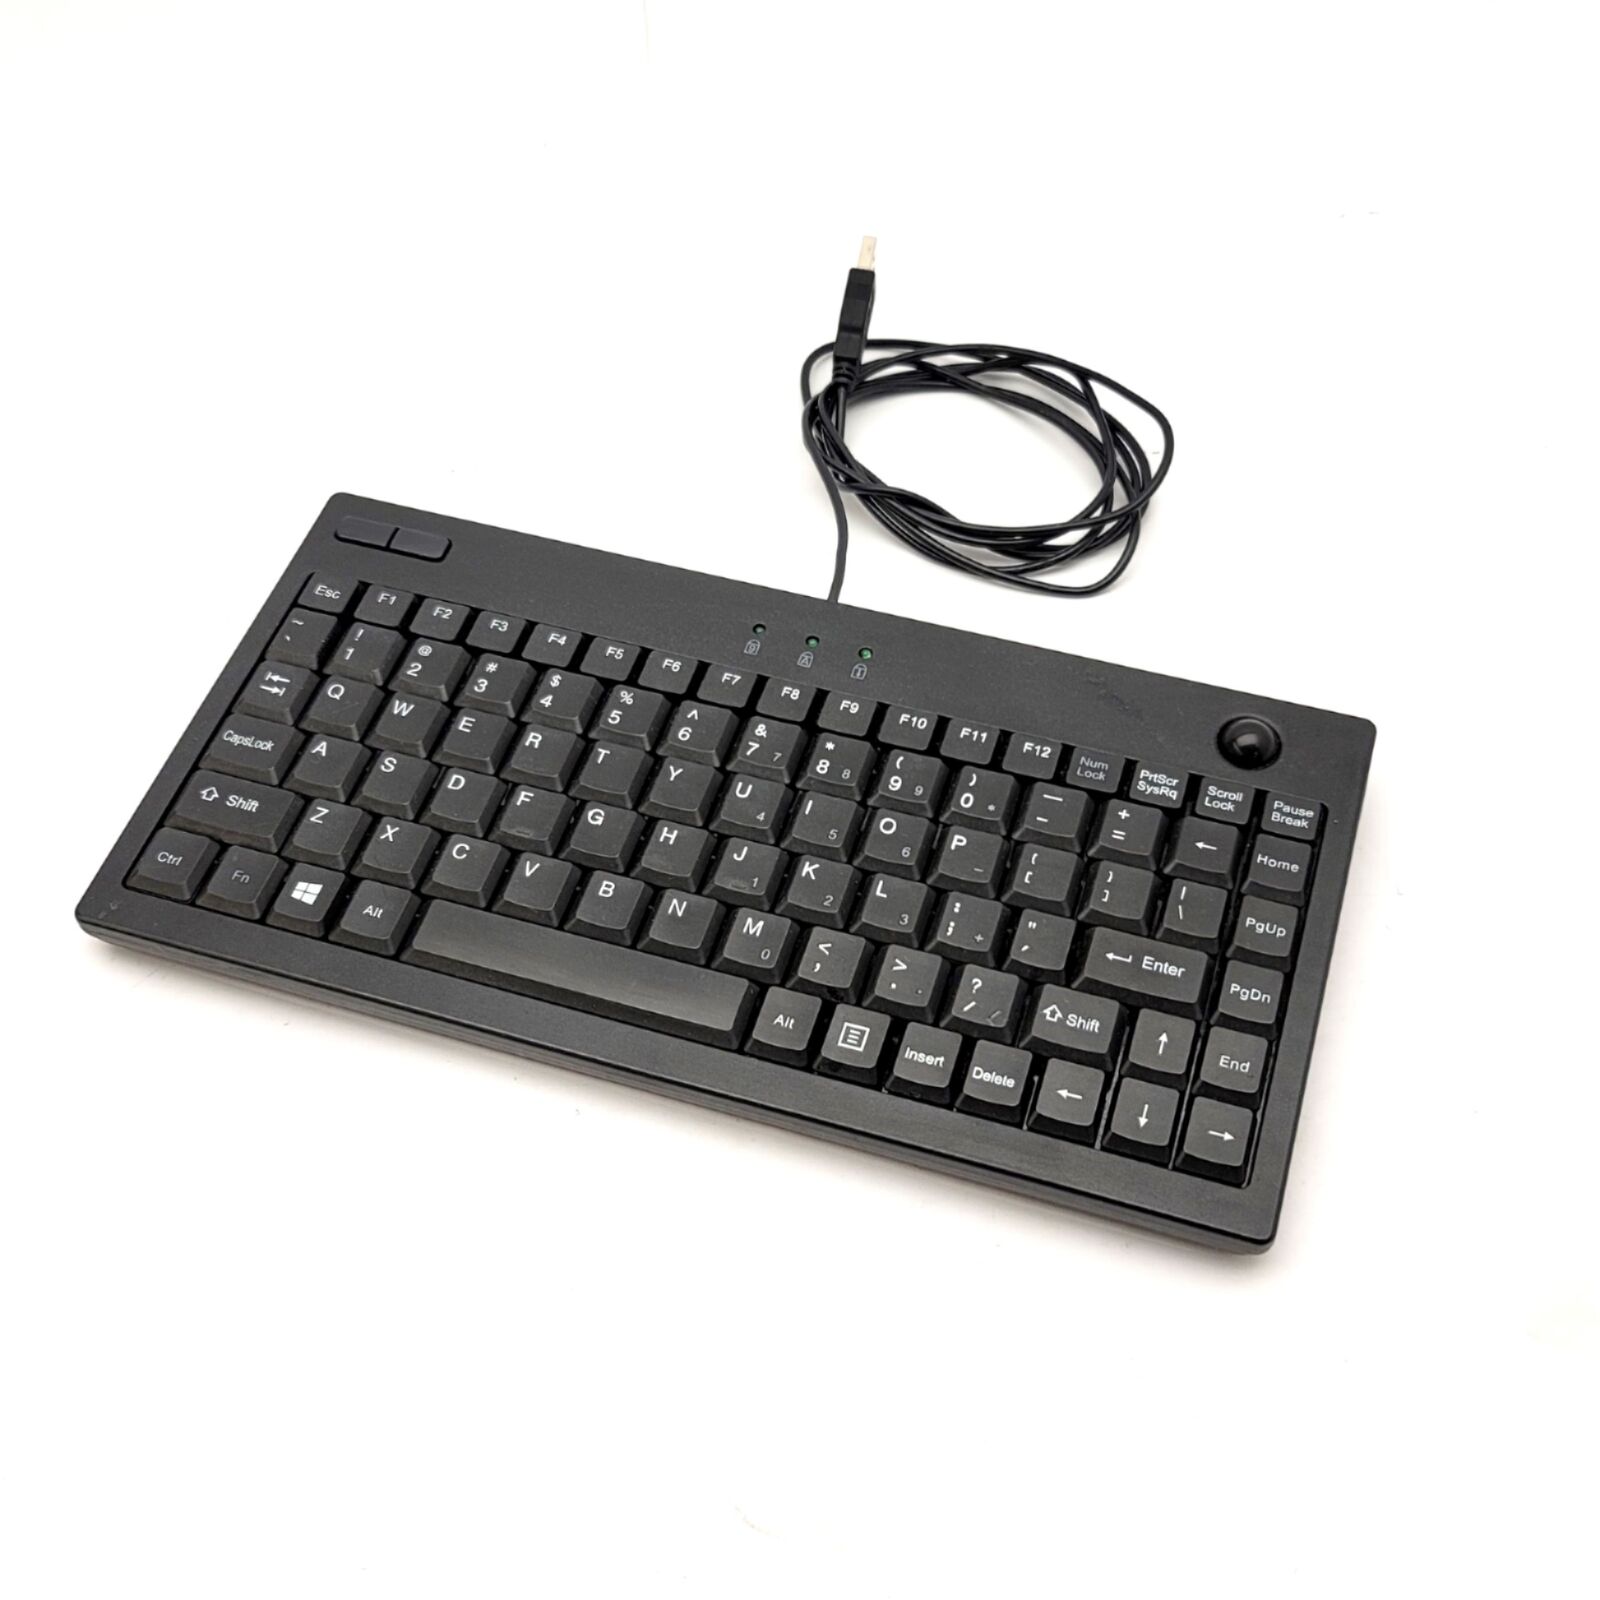 Adesso AKB-310UB Miniature Keyboard With Built in Optical Trackball, USB Cable